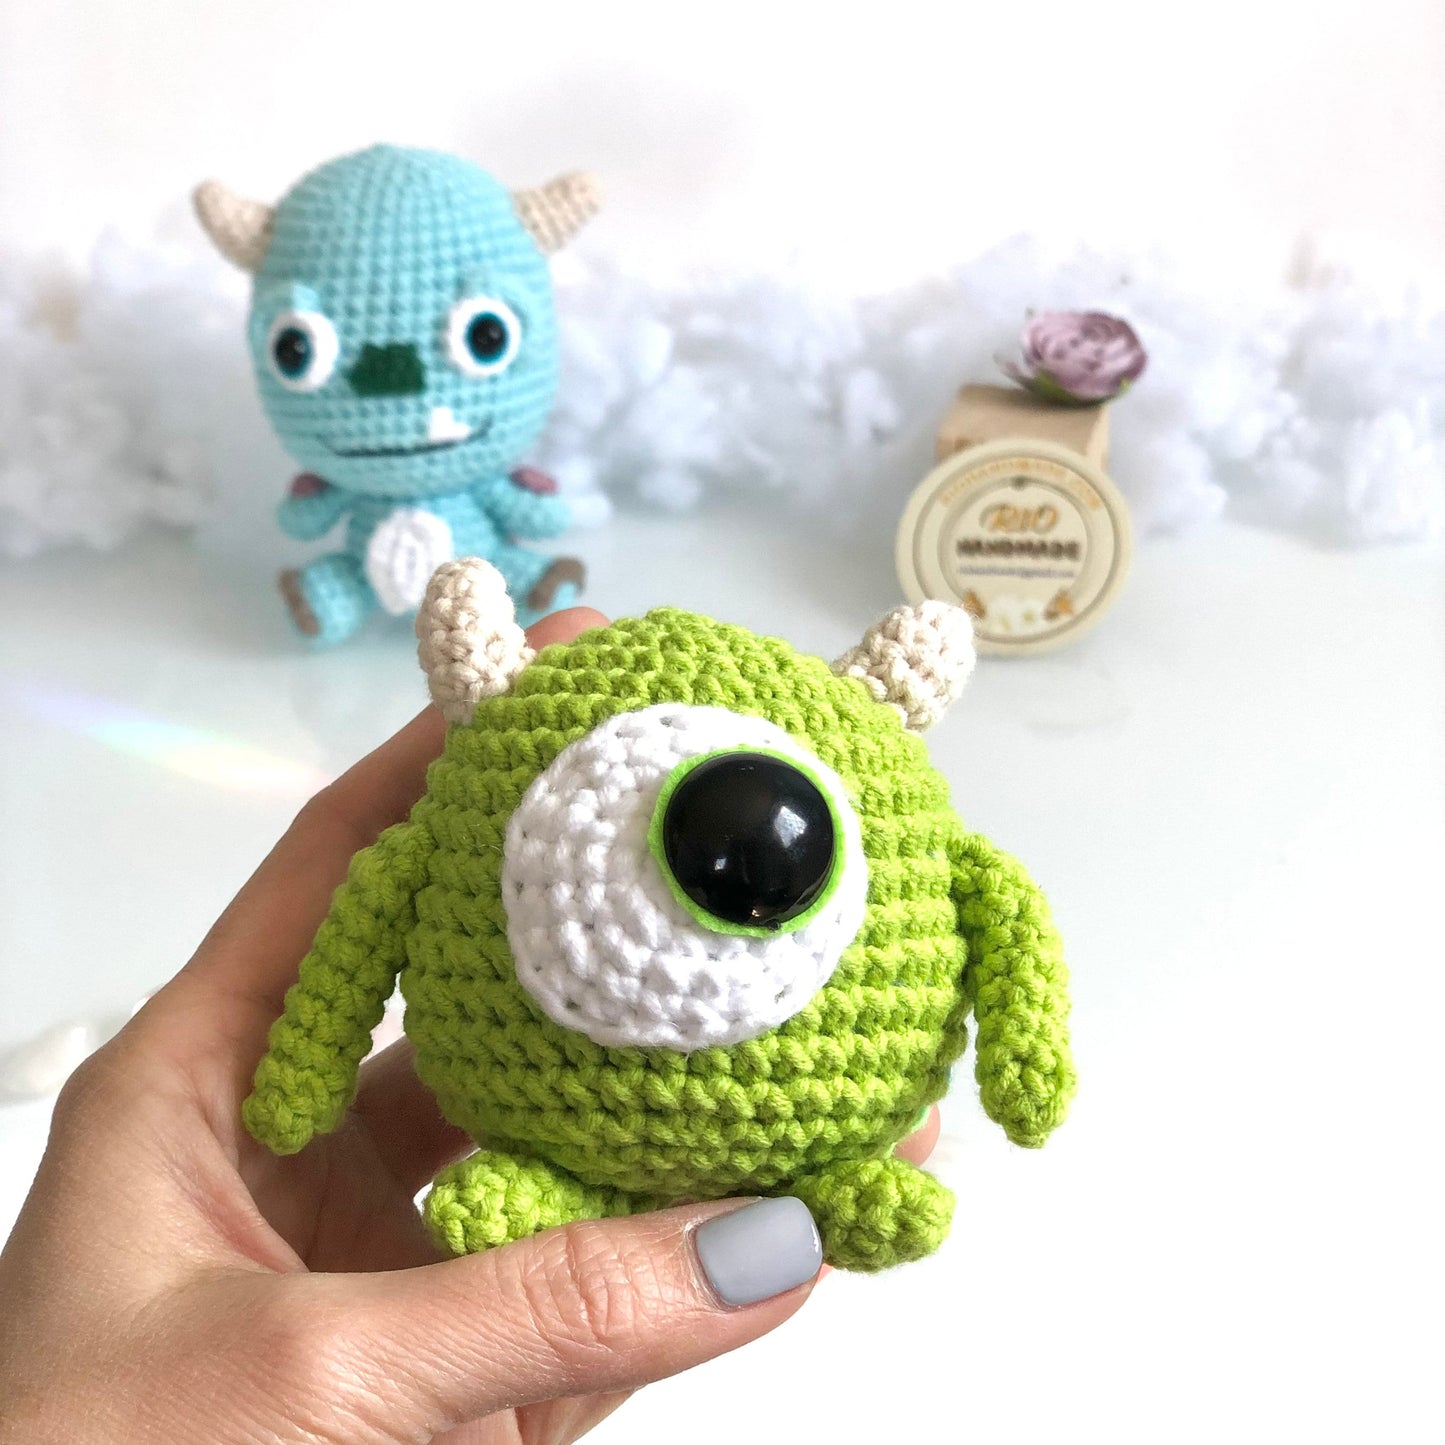 Handmade monster crochet, amigurumi Mike Wazowski, Sully, Crochet toys inspired by Monster Inc. plushie toy, cute gift